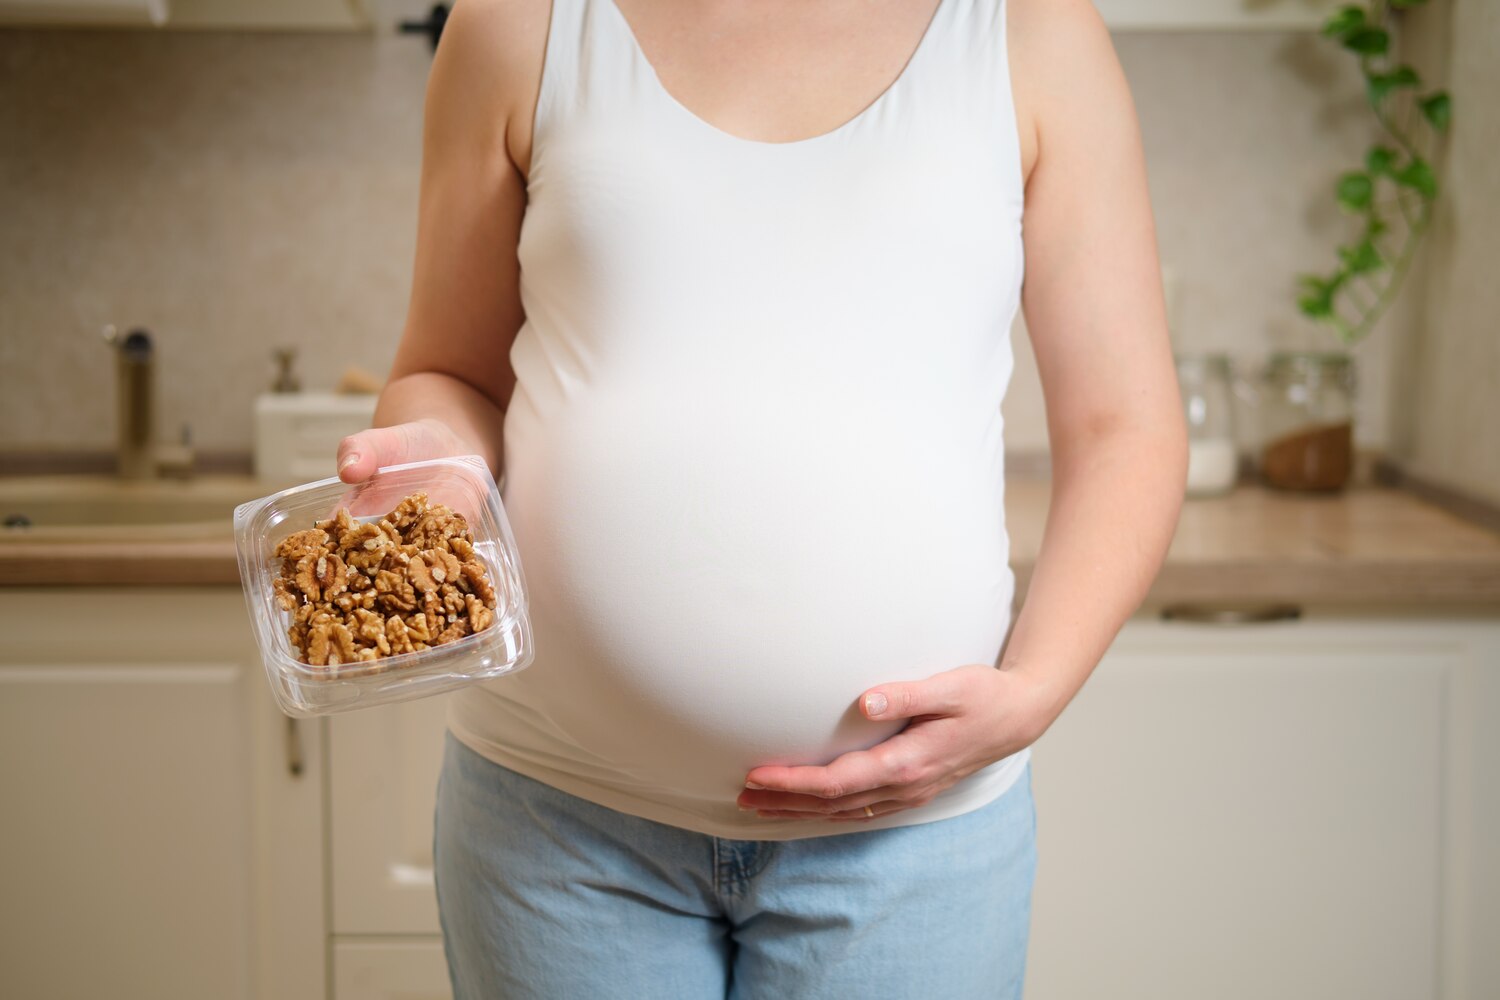 Eating Walnuts During Pregnancy